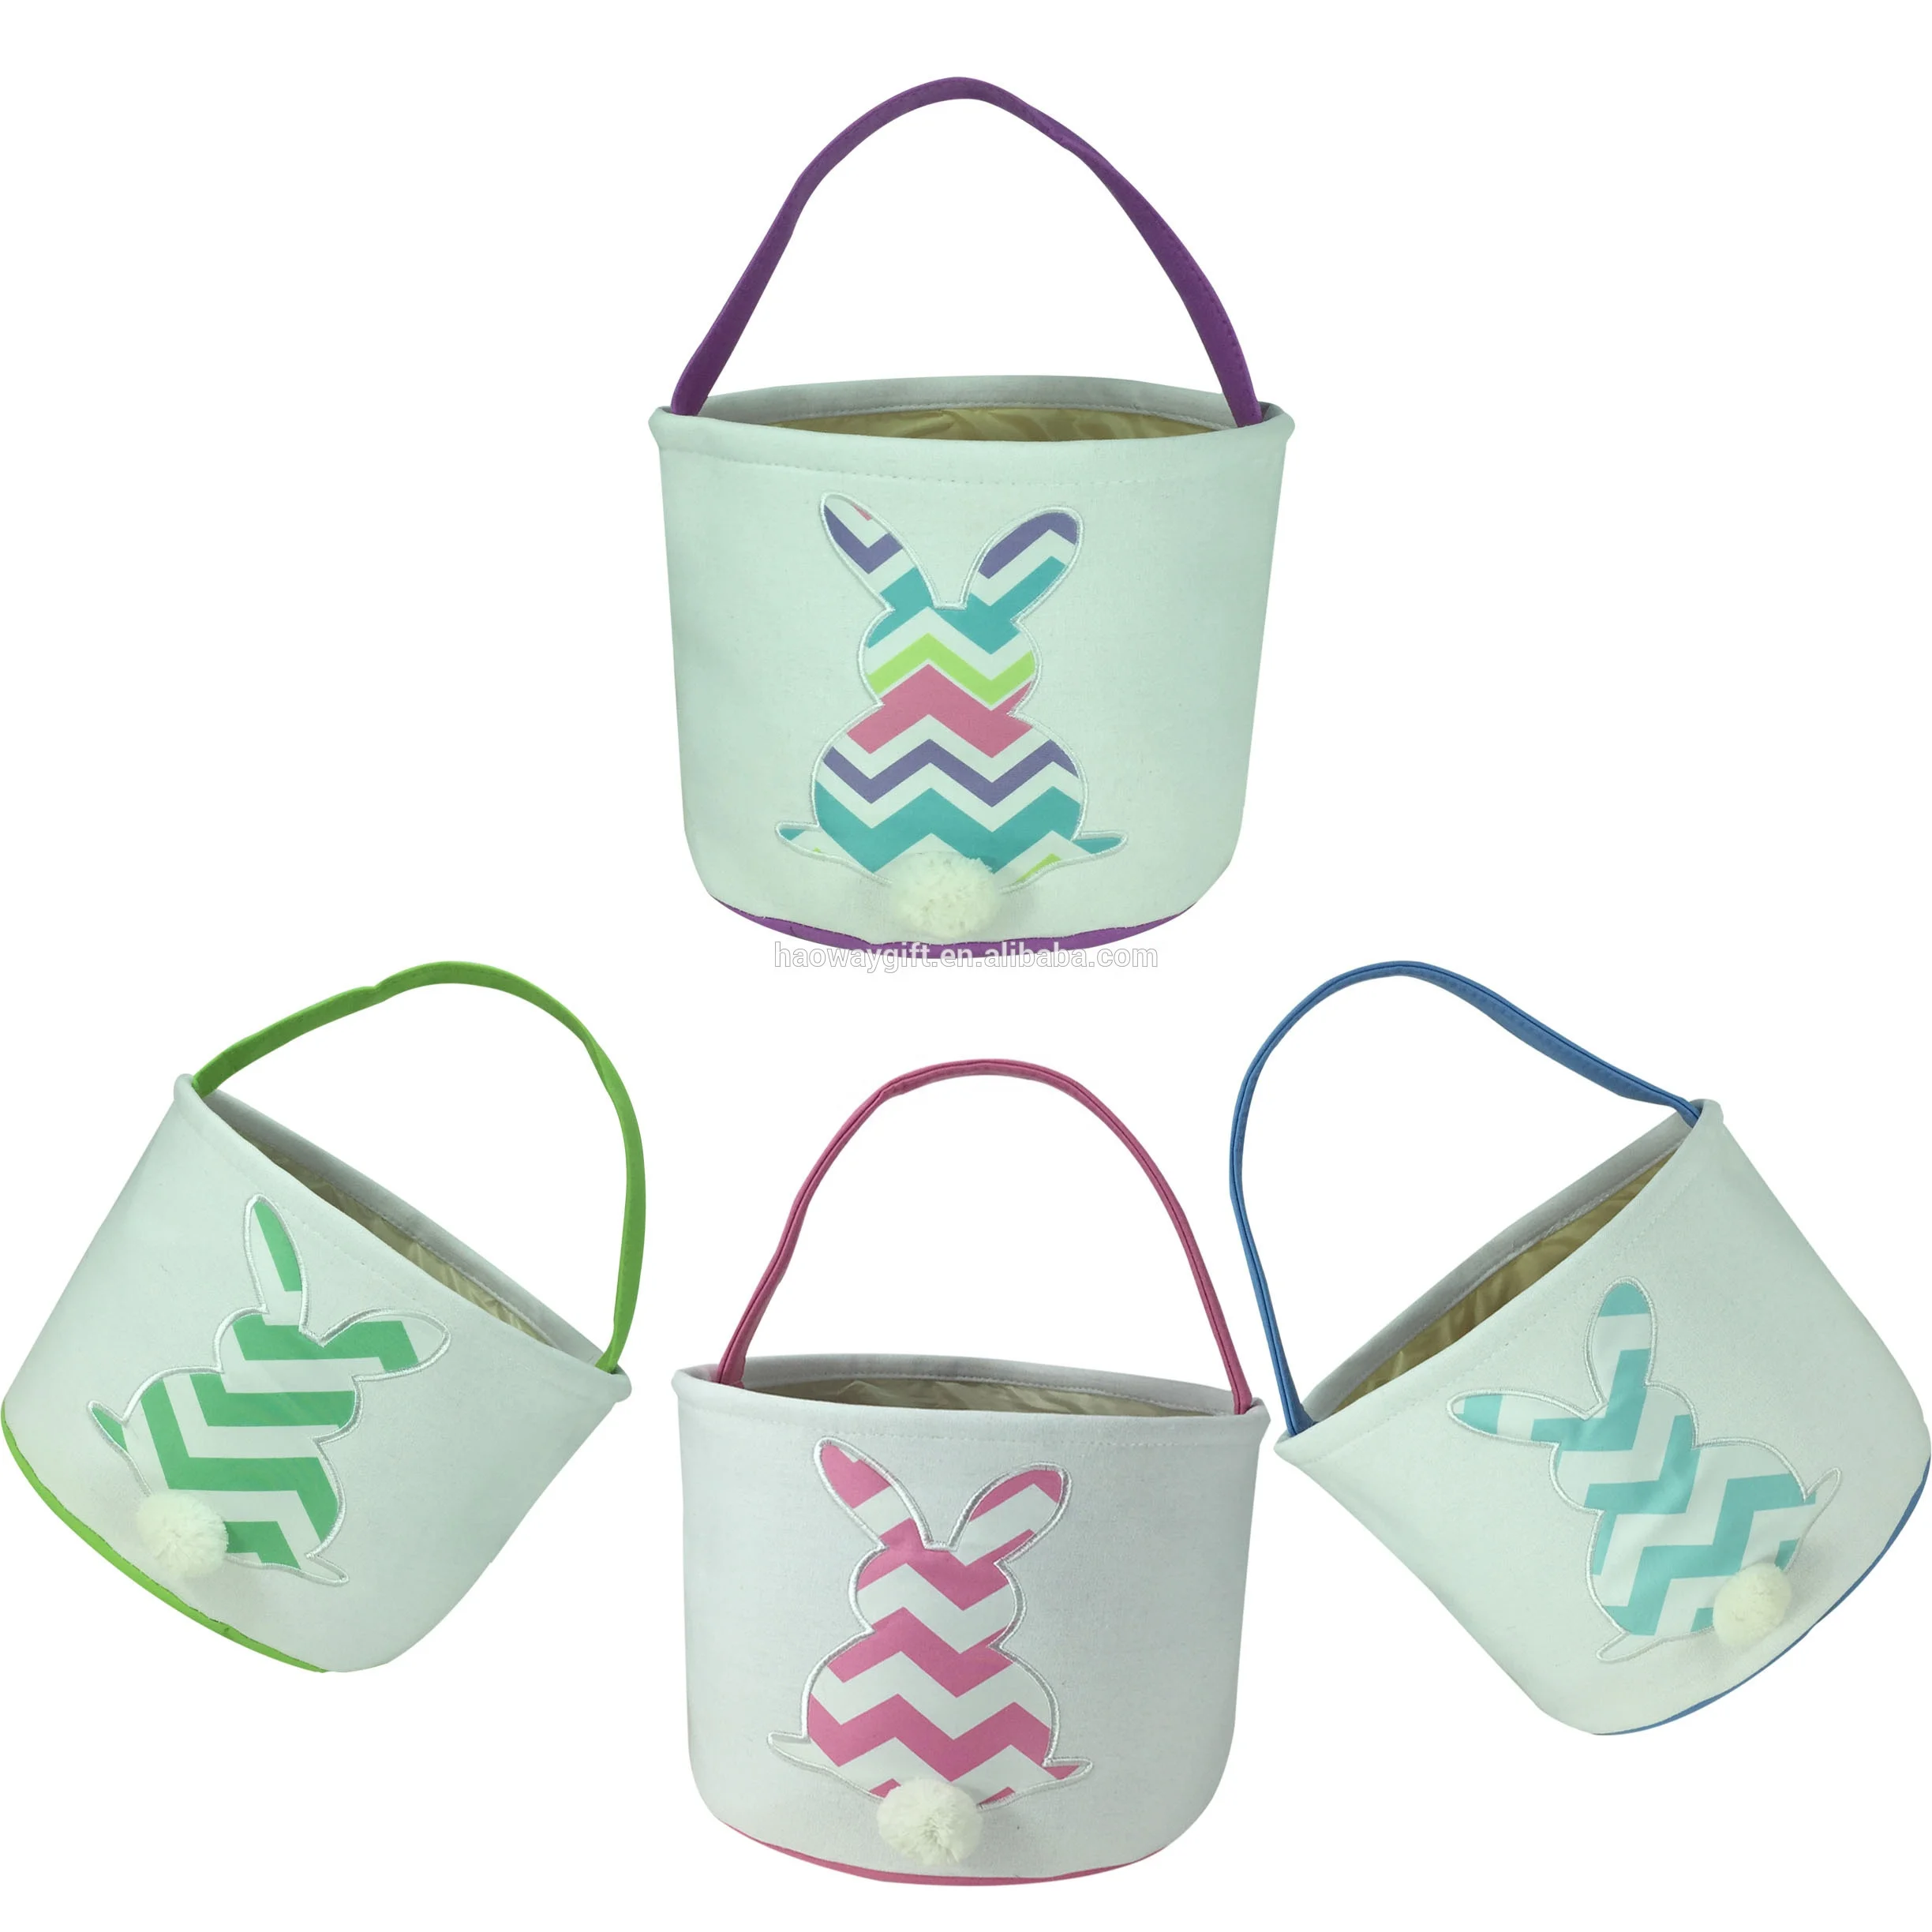 

Wholesale Factory 2020 Easter Bucket Cute Canvas Easter Bunny Tail Basket In Stock., Pink,blue,purple,green,mint